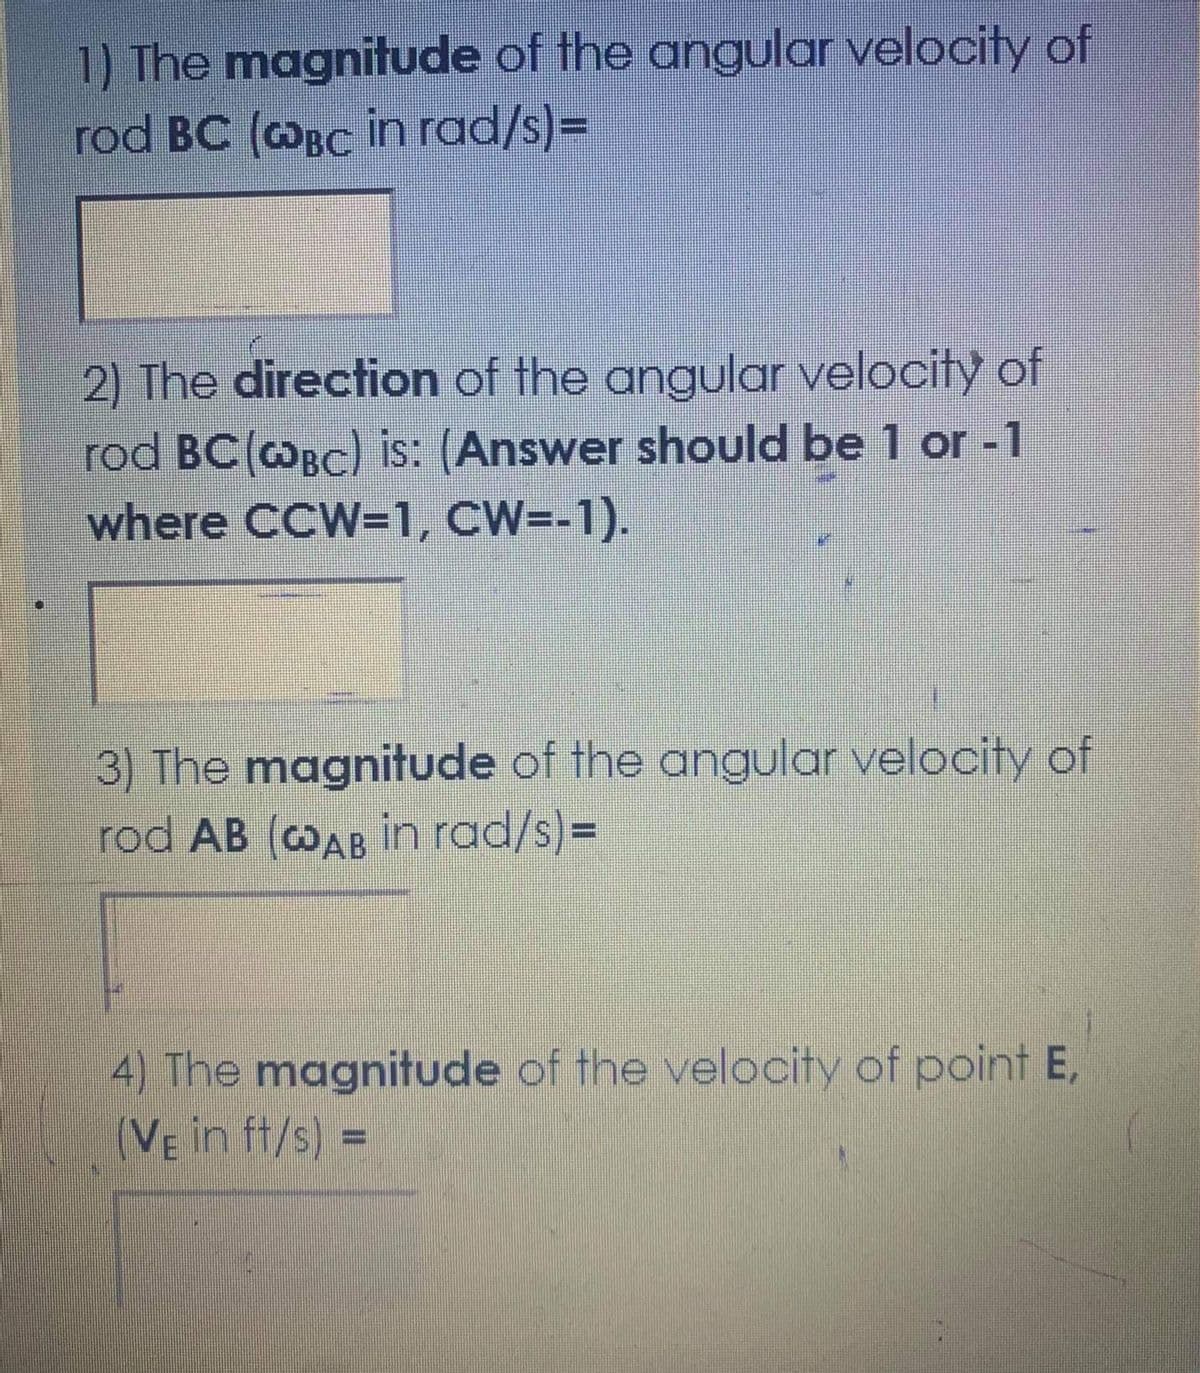 1) The magnitude of the angular velocity of
rod BC (@Bc in rad/s)=
2) The direction of the angular velocity of
rod BC(@Bc) is: (Answer should be 1 or -1
where CCW=1, CW=-1).
3) The magnitude of the angular velocity of
rod AB (cOAB in rad/s)3D
4) The magnitude of the velocity of point E,
(VE in ft/s) =
